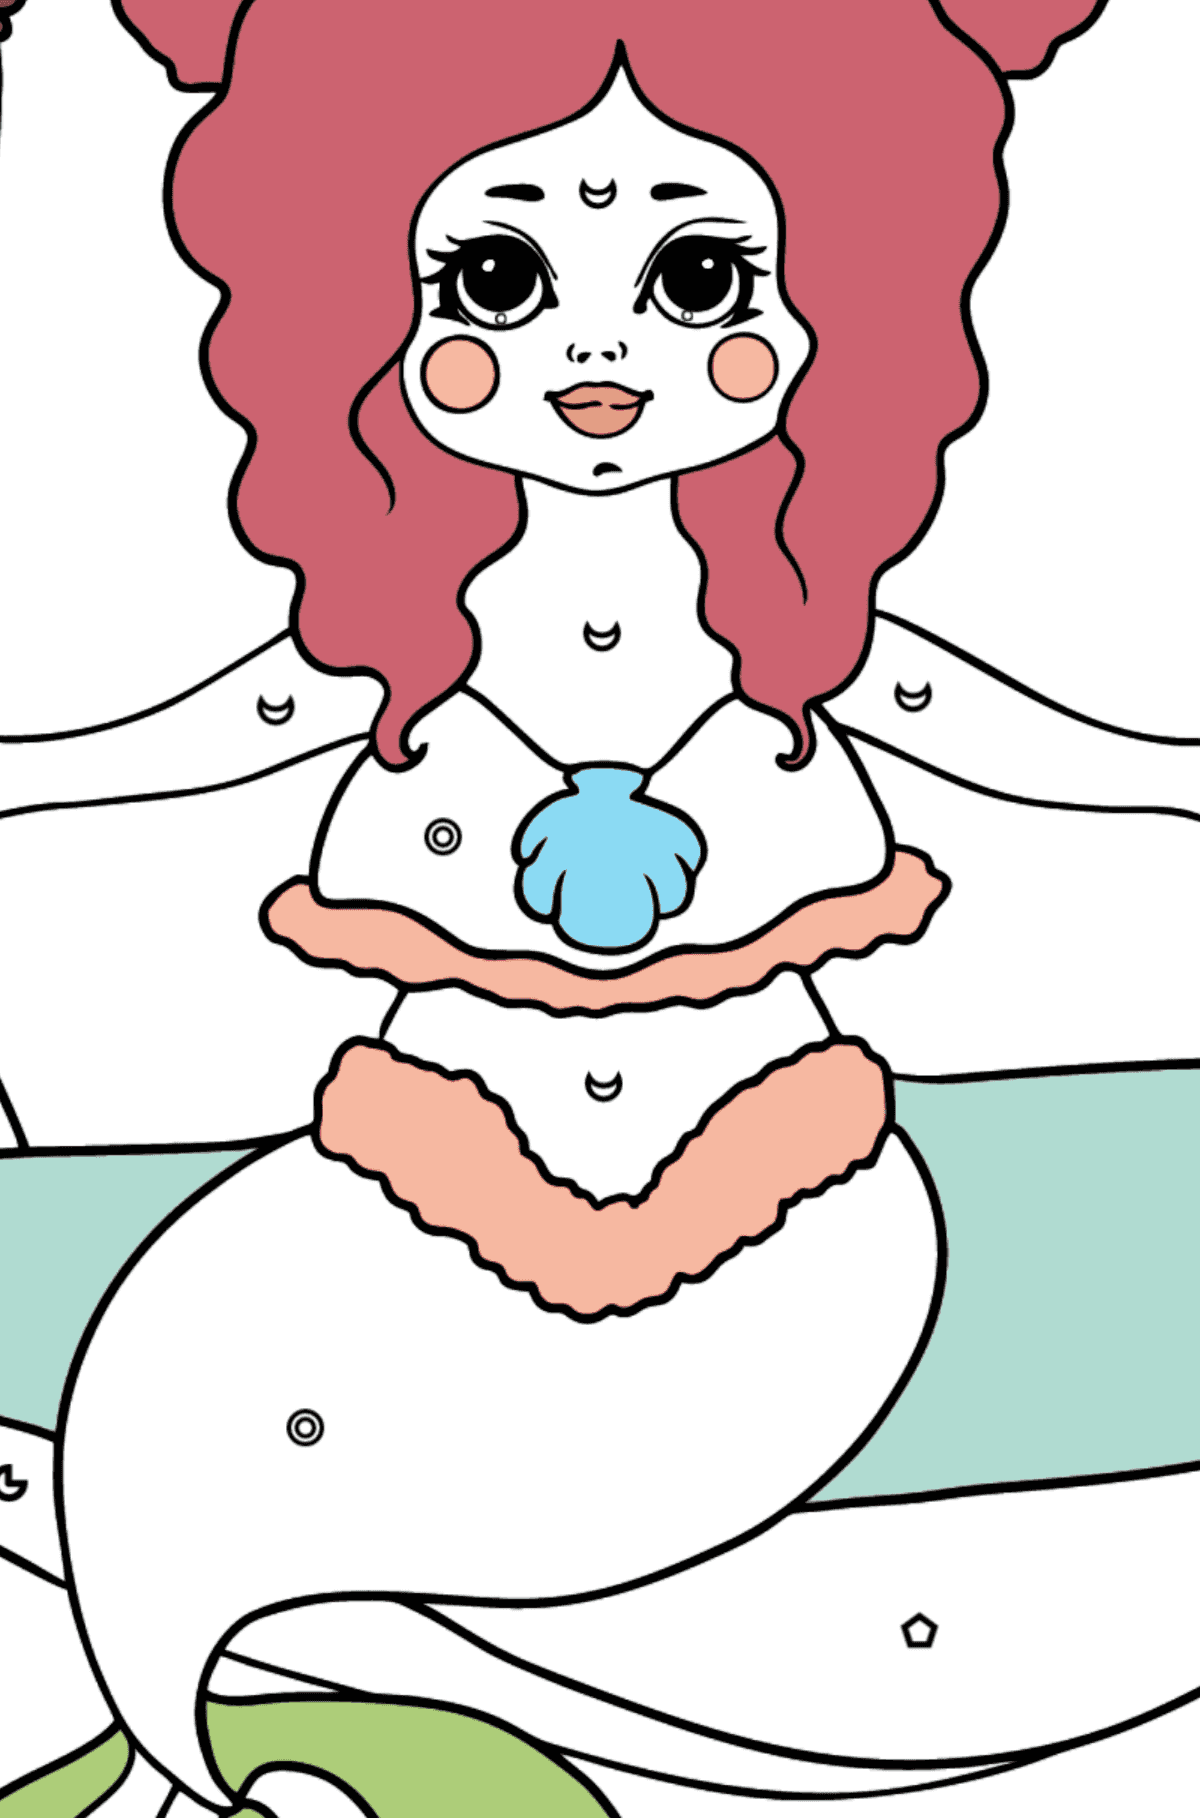 Mermaid and Two Fish coloring page - Coloring by Geometric Shapes for Kids